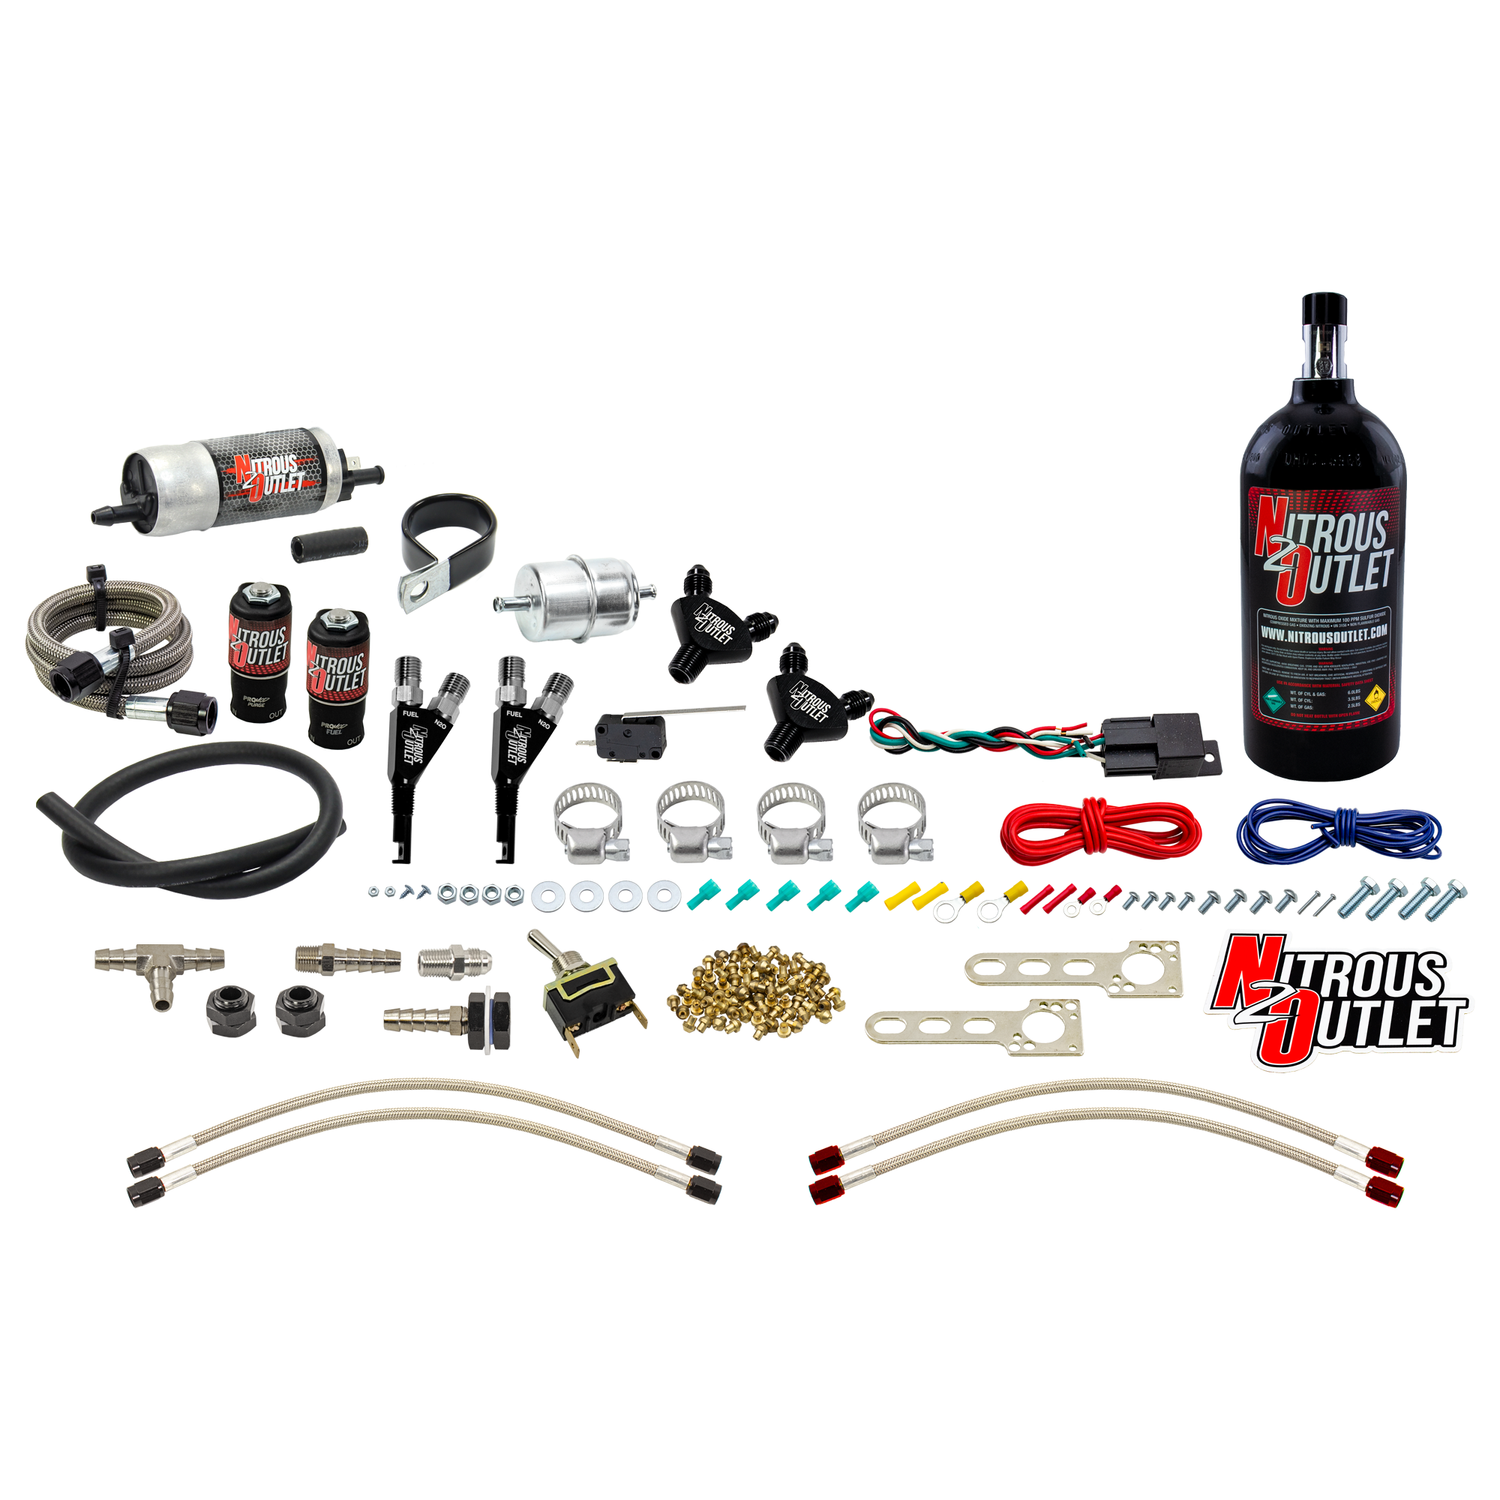 Twin Cylinder Powersports Carbureted Nitrous Systems